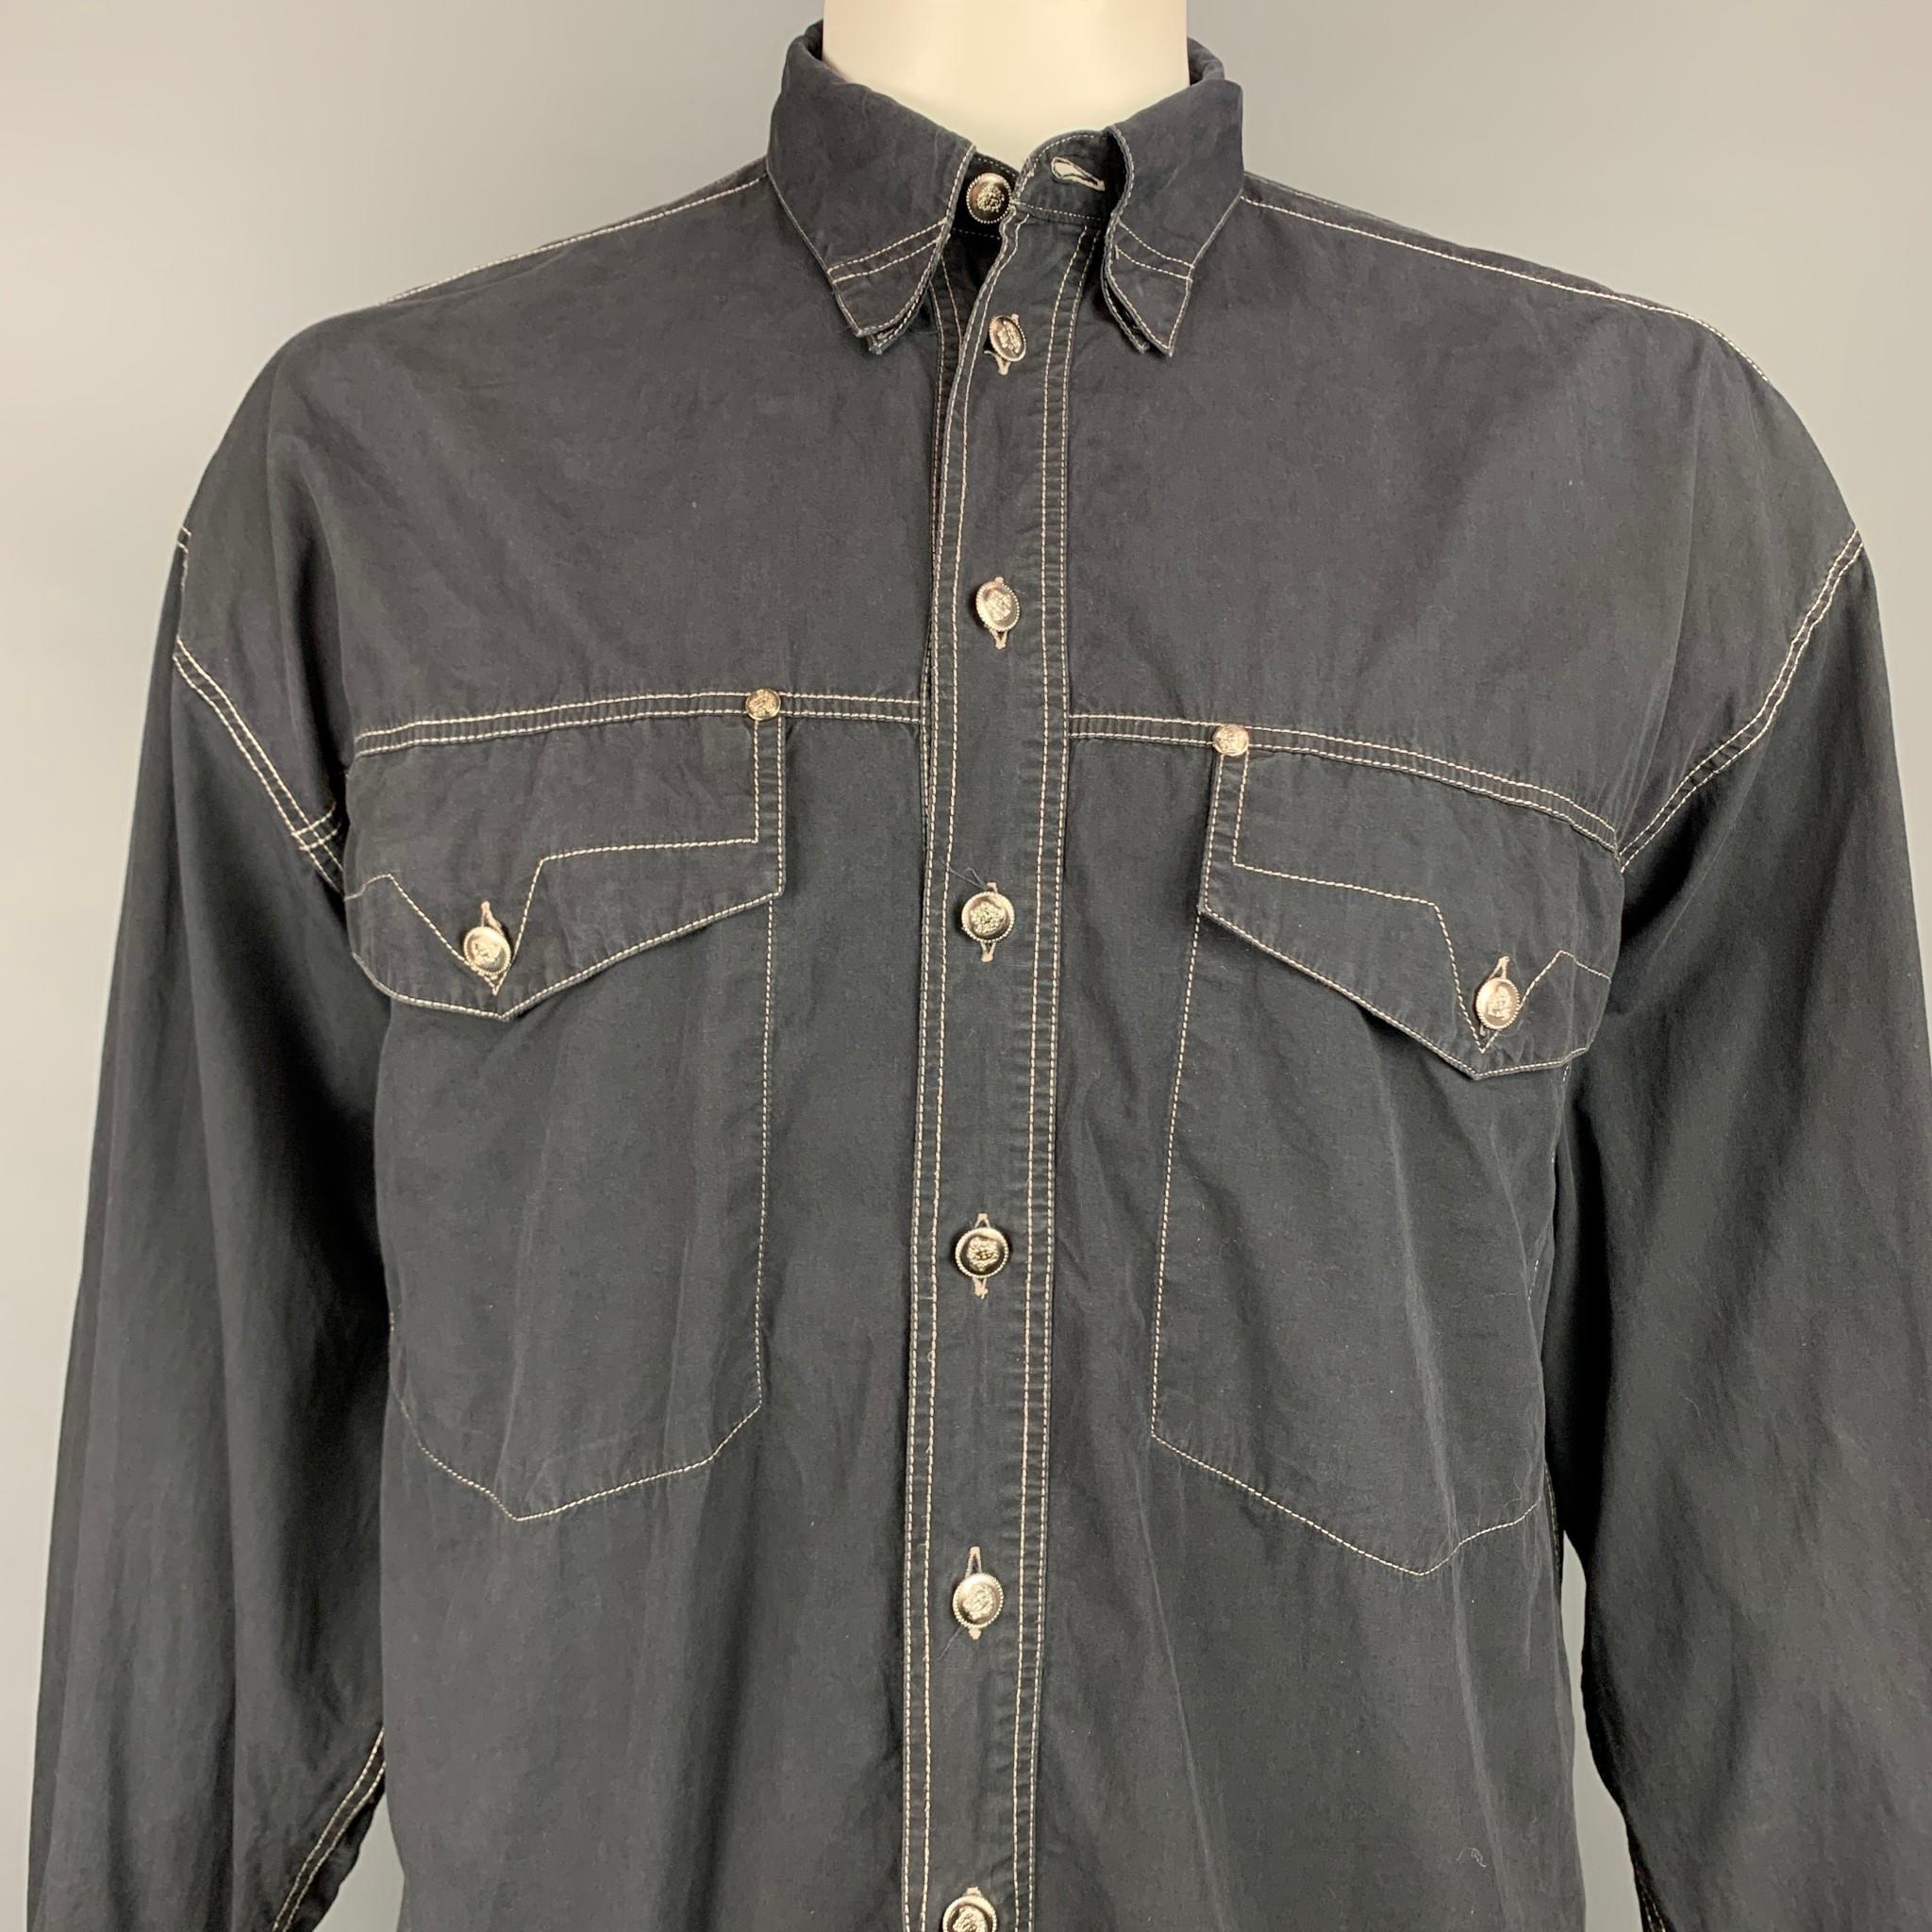 Vintage VERSACE JEANS COUTURE long sleeve shirt comes in a black cotton with contrast stitching featuring a button down style, loose fit, patch pockets, and silver tone medusa head buttons. Made in Italy.

Good Pre-Owned Condition.
Marked: